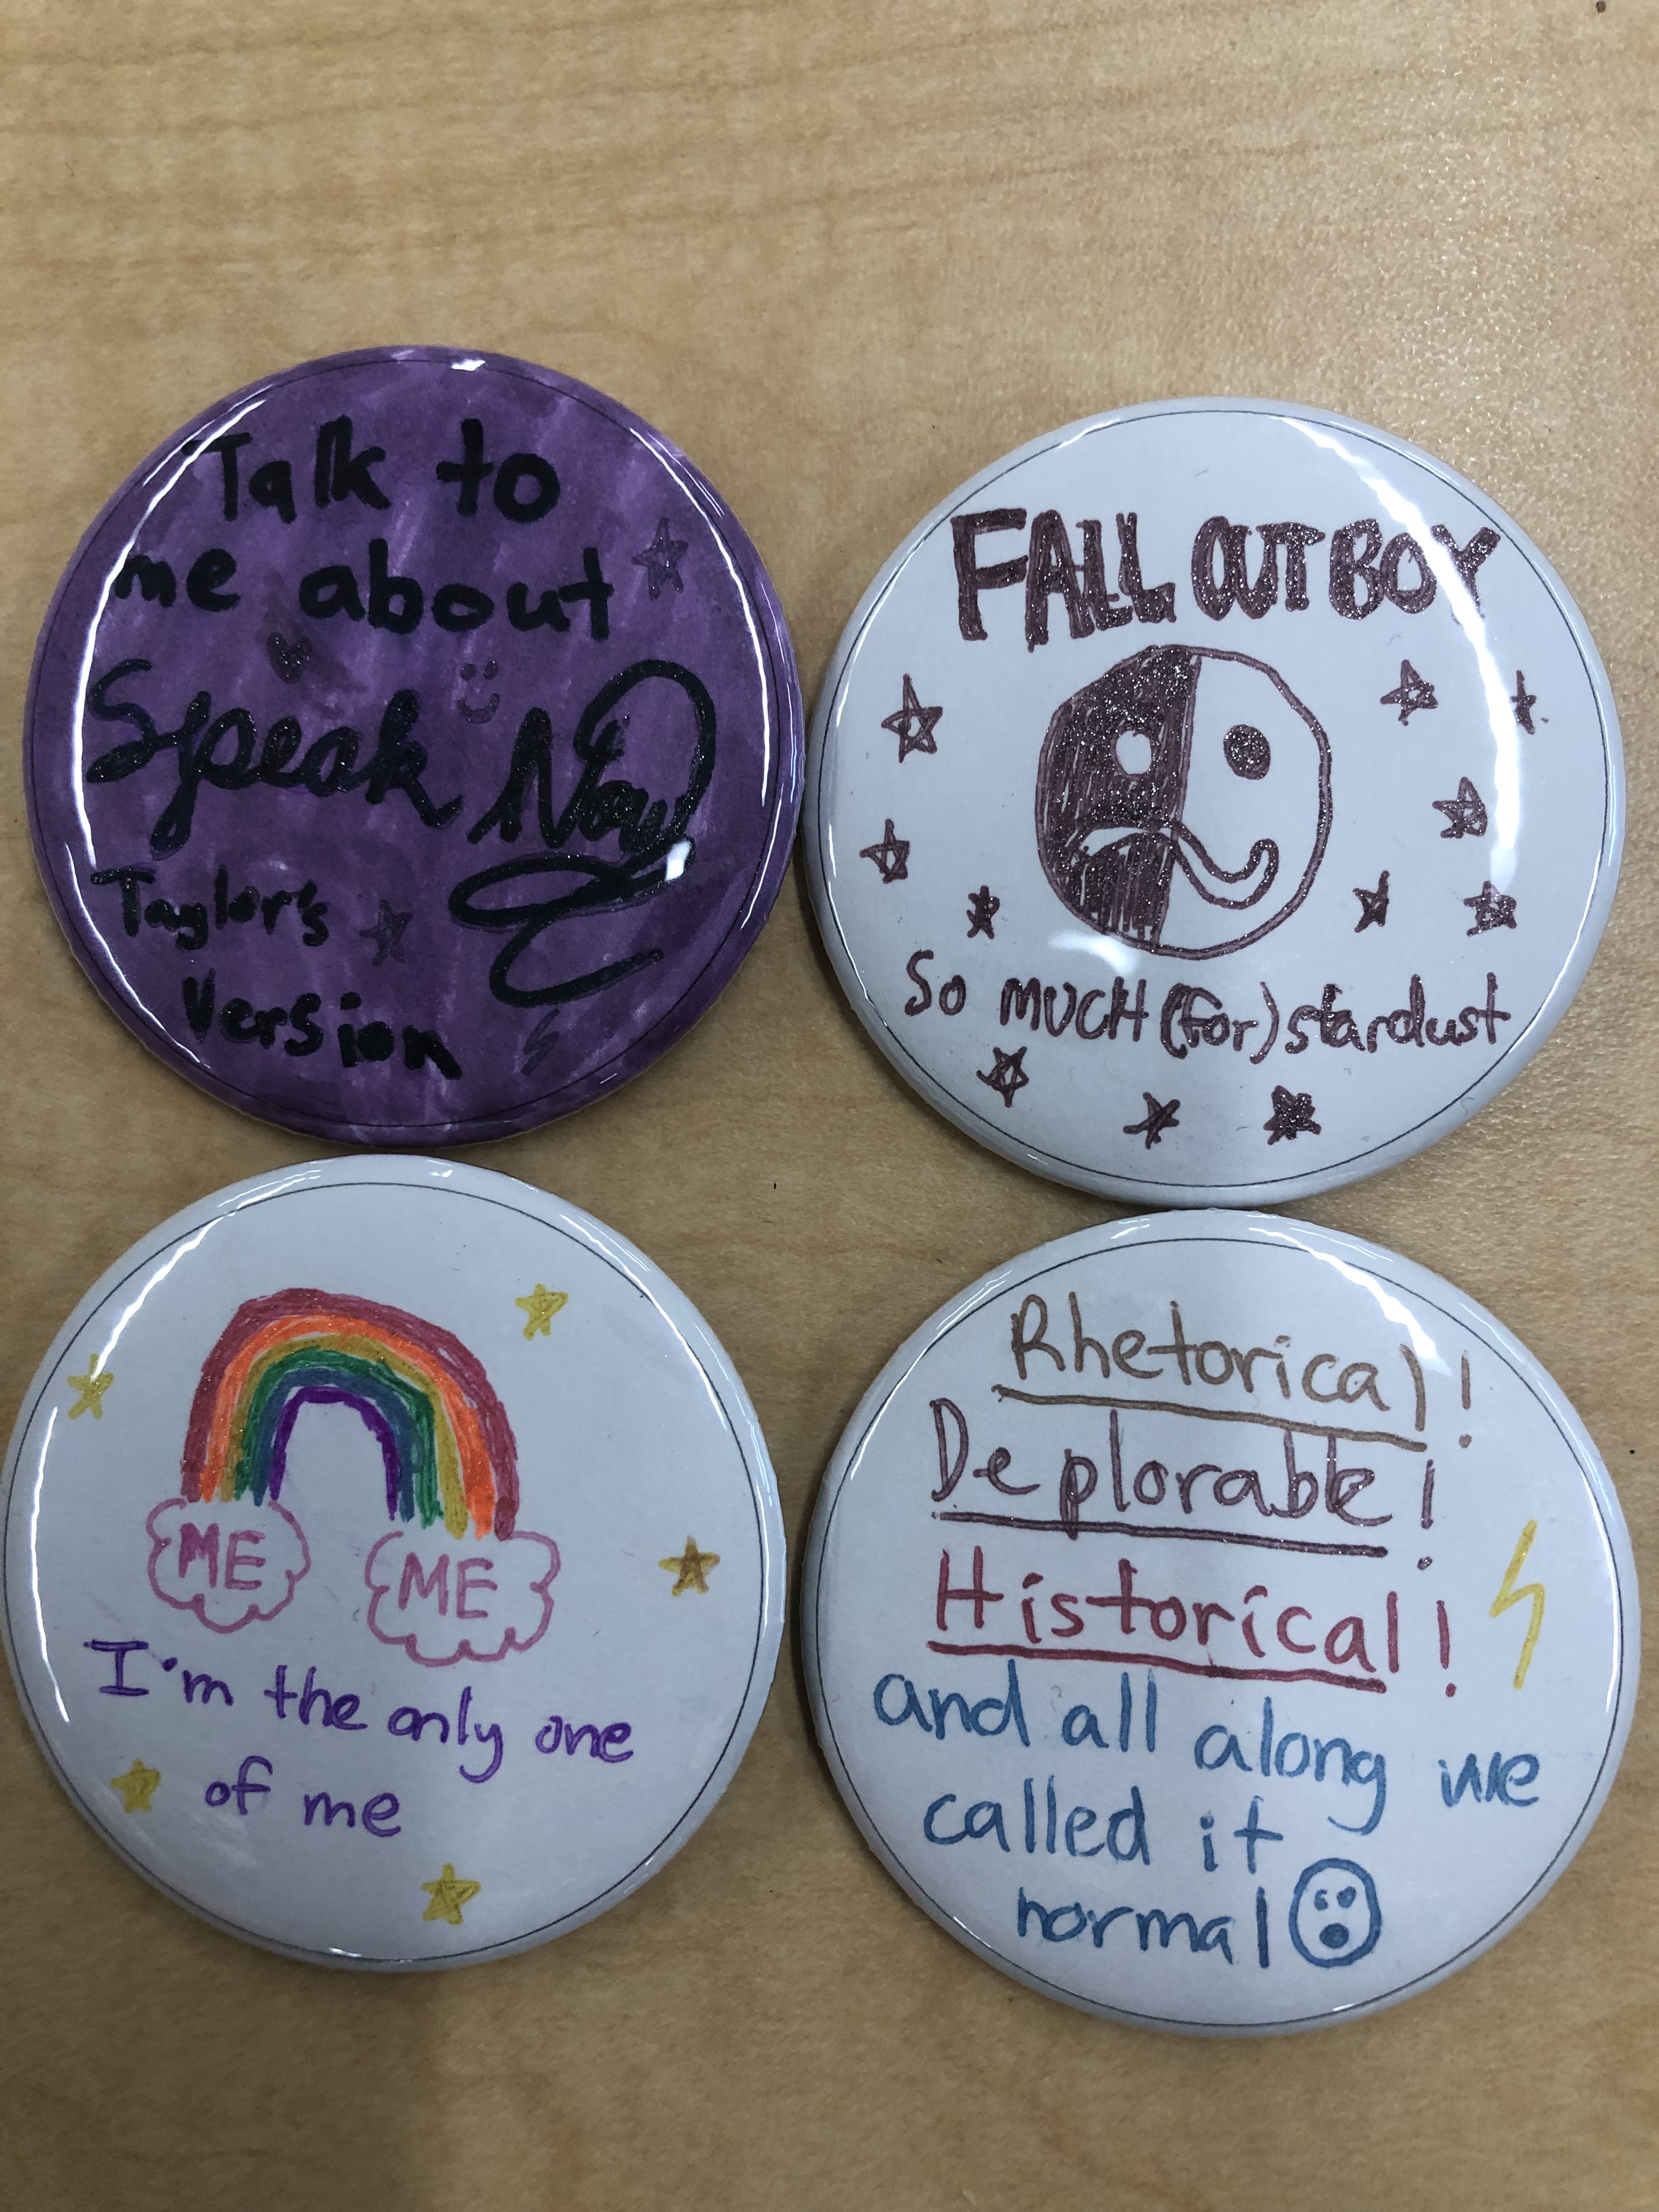 4 homemade buttons featuring band names and inspirational messages